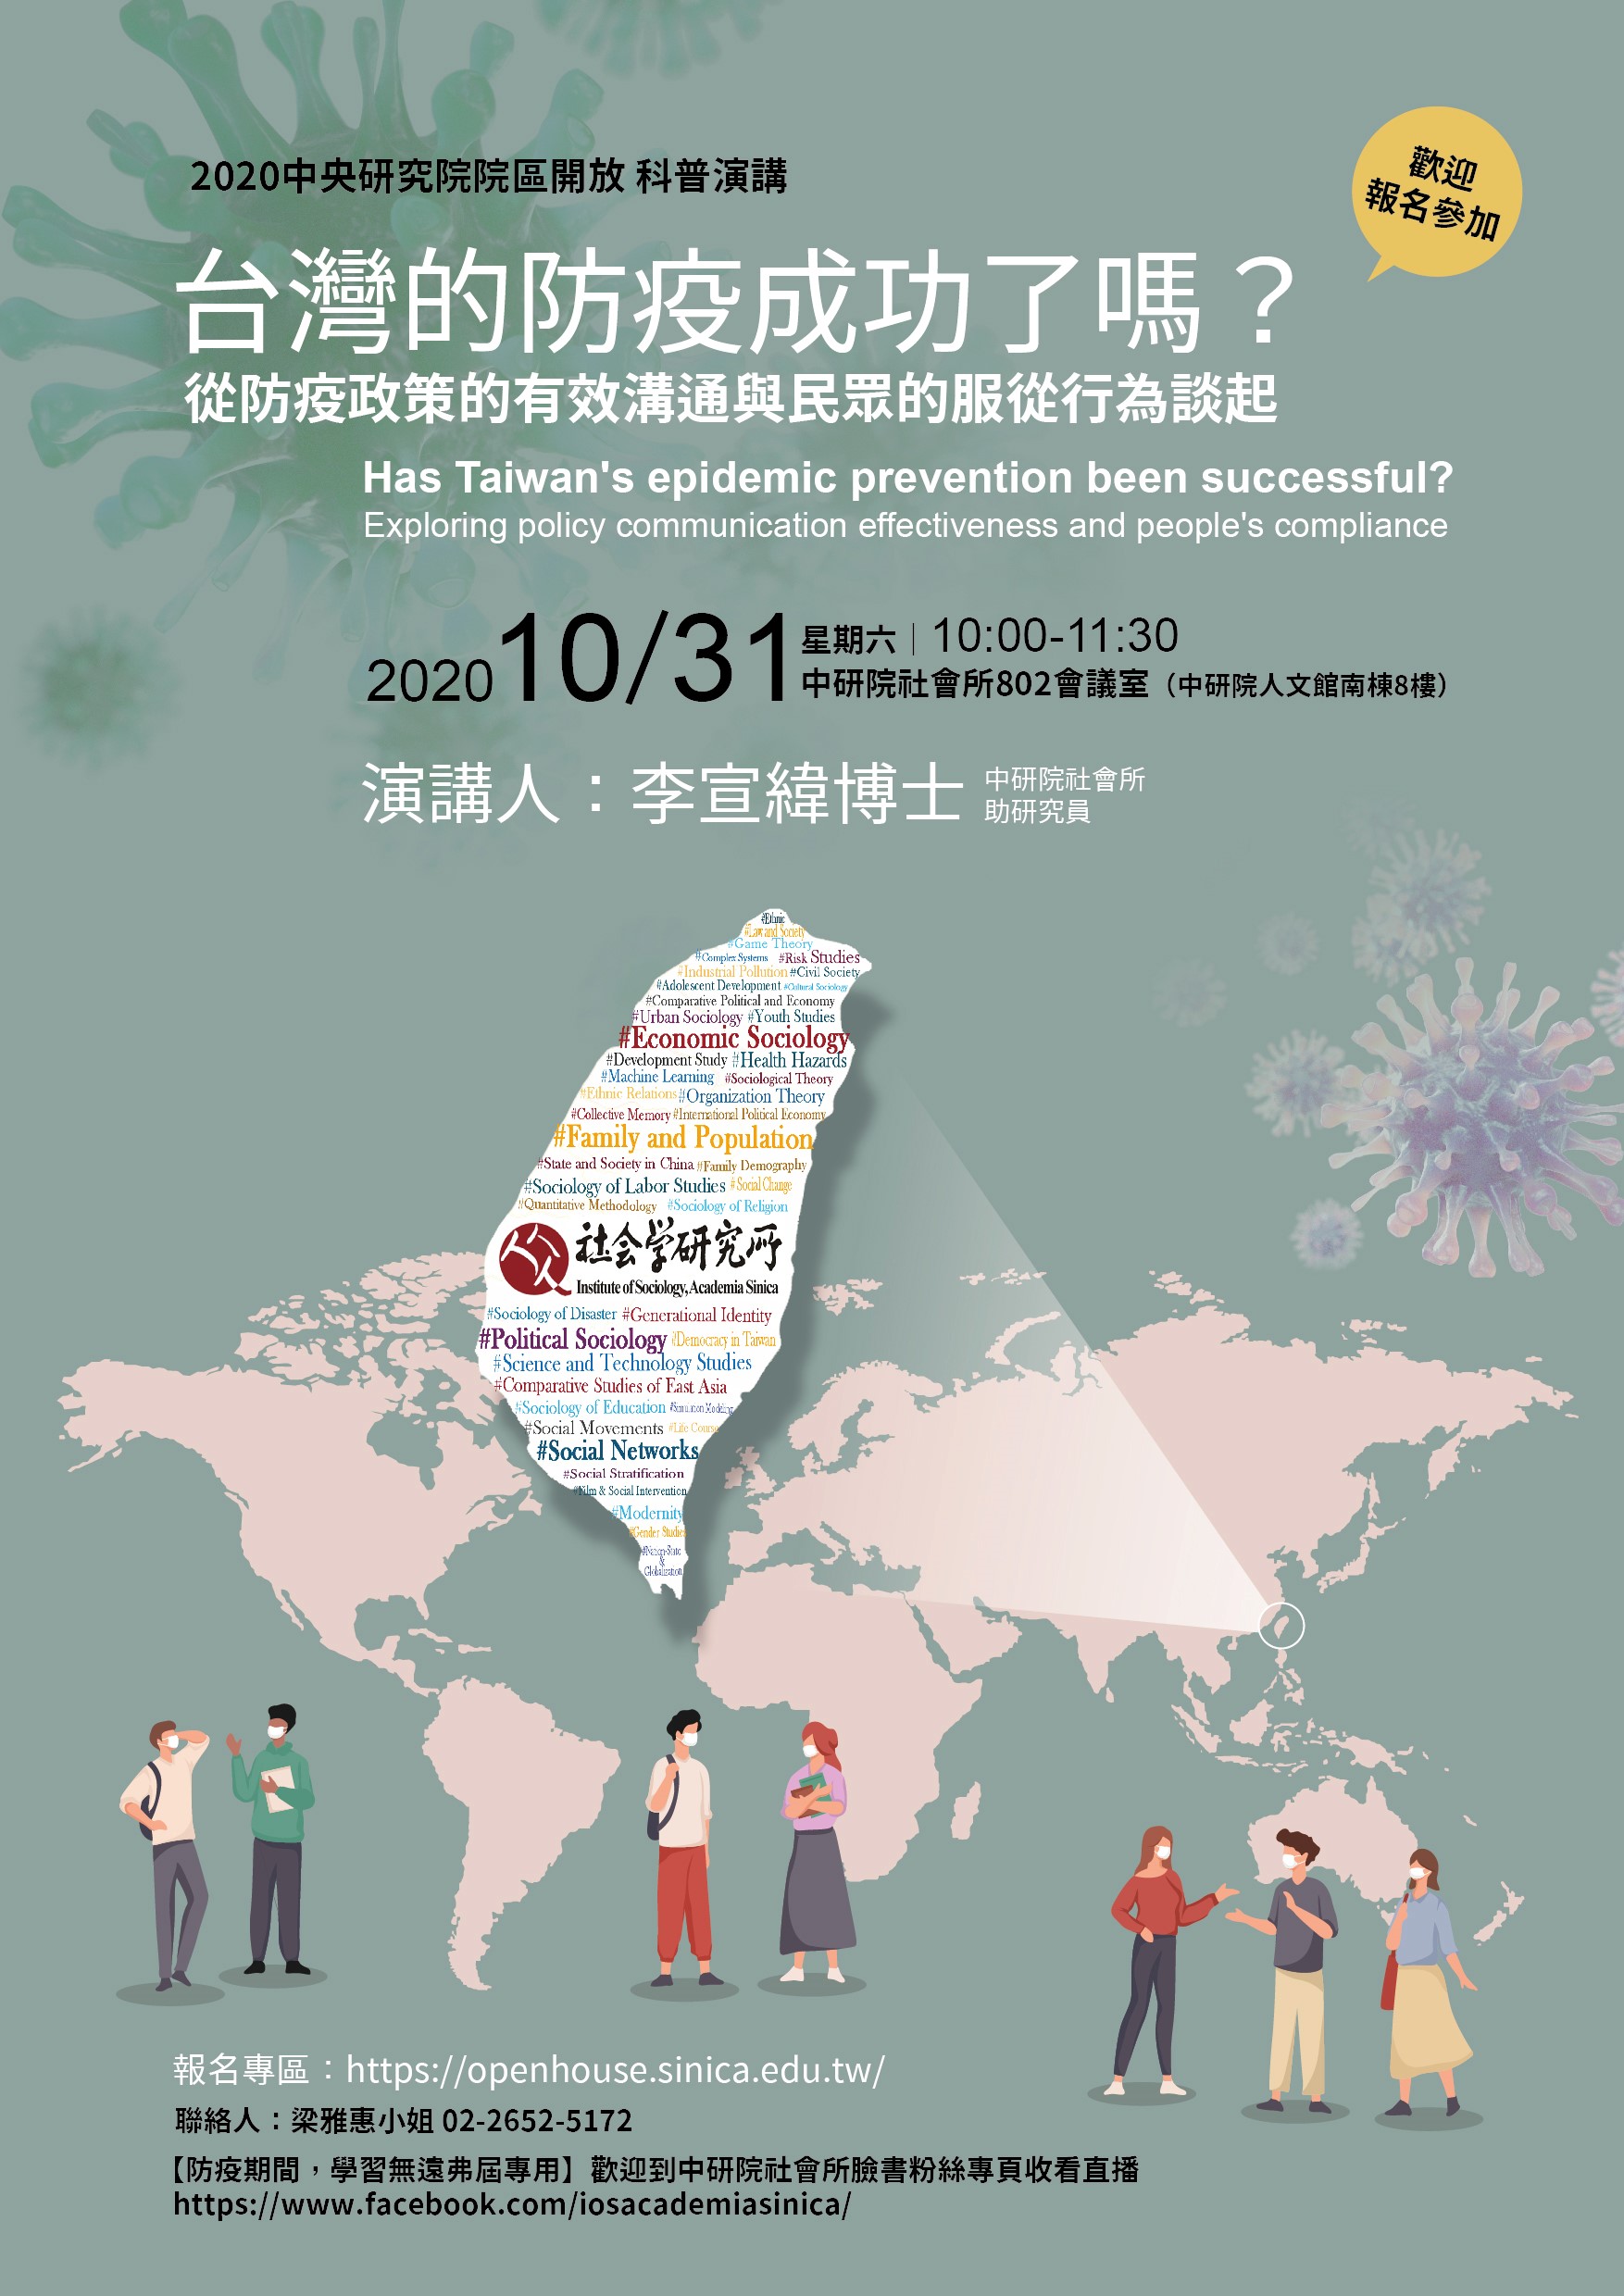 【Institute of Sociology】Has Taiwan's epidemic prevention been successful? Exploring policy communication effectiveness and people's compliance